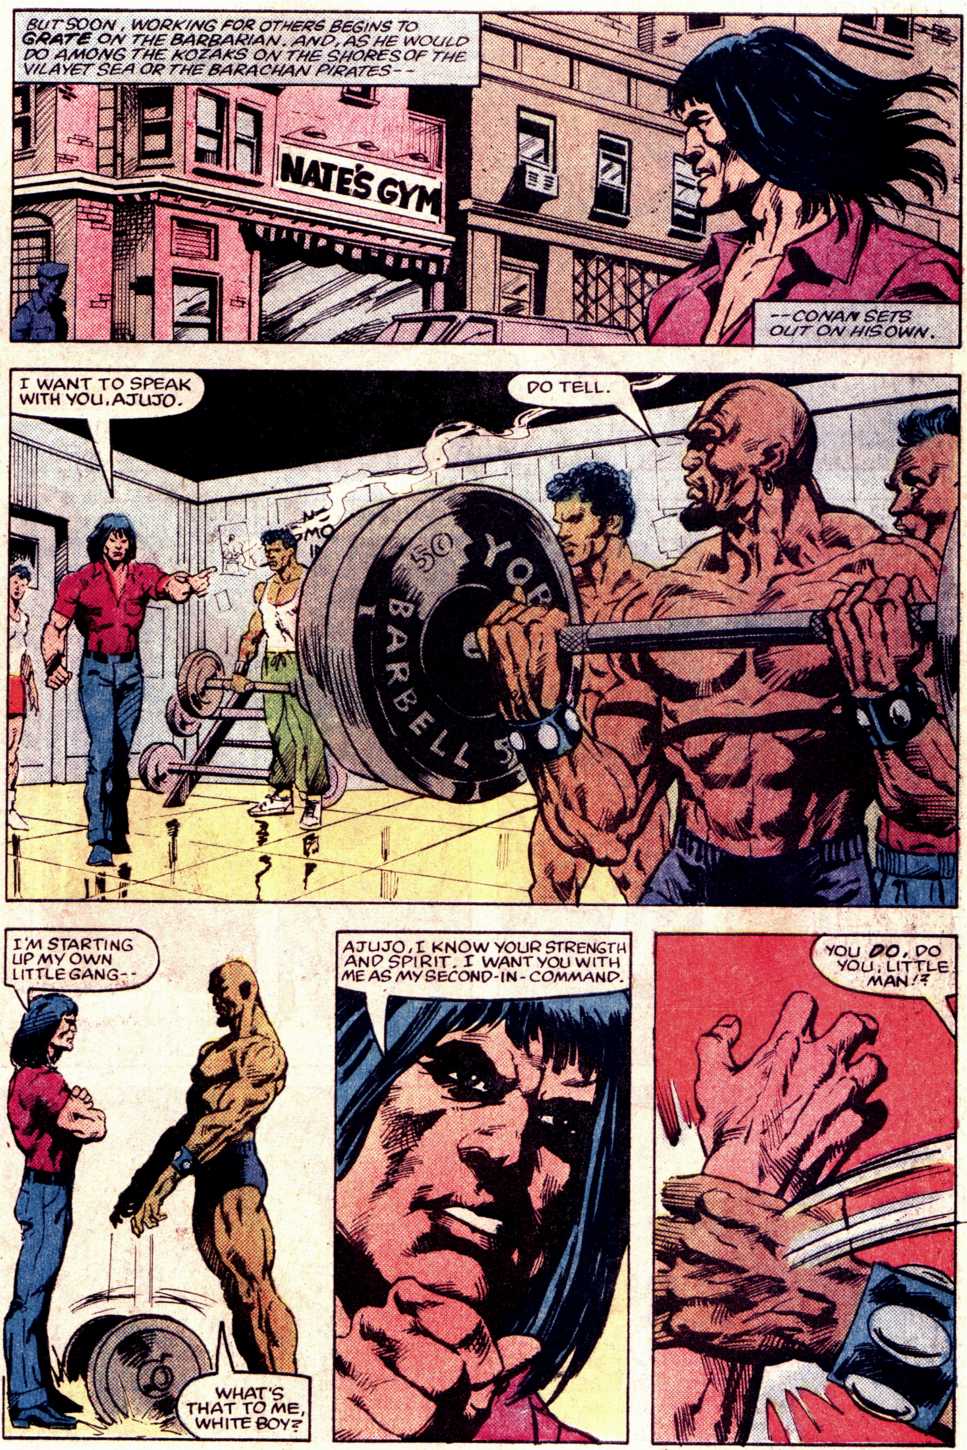 What If? (1977) issue 43 - Conan the Barbarian were stranded in the 20th century - Page 14